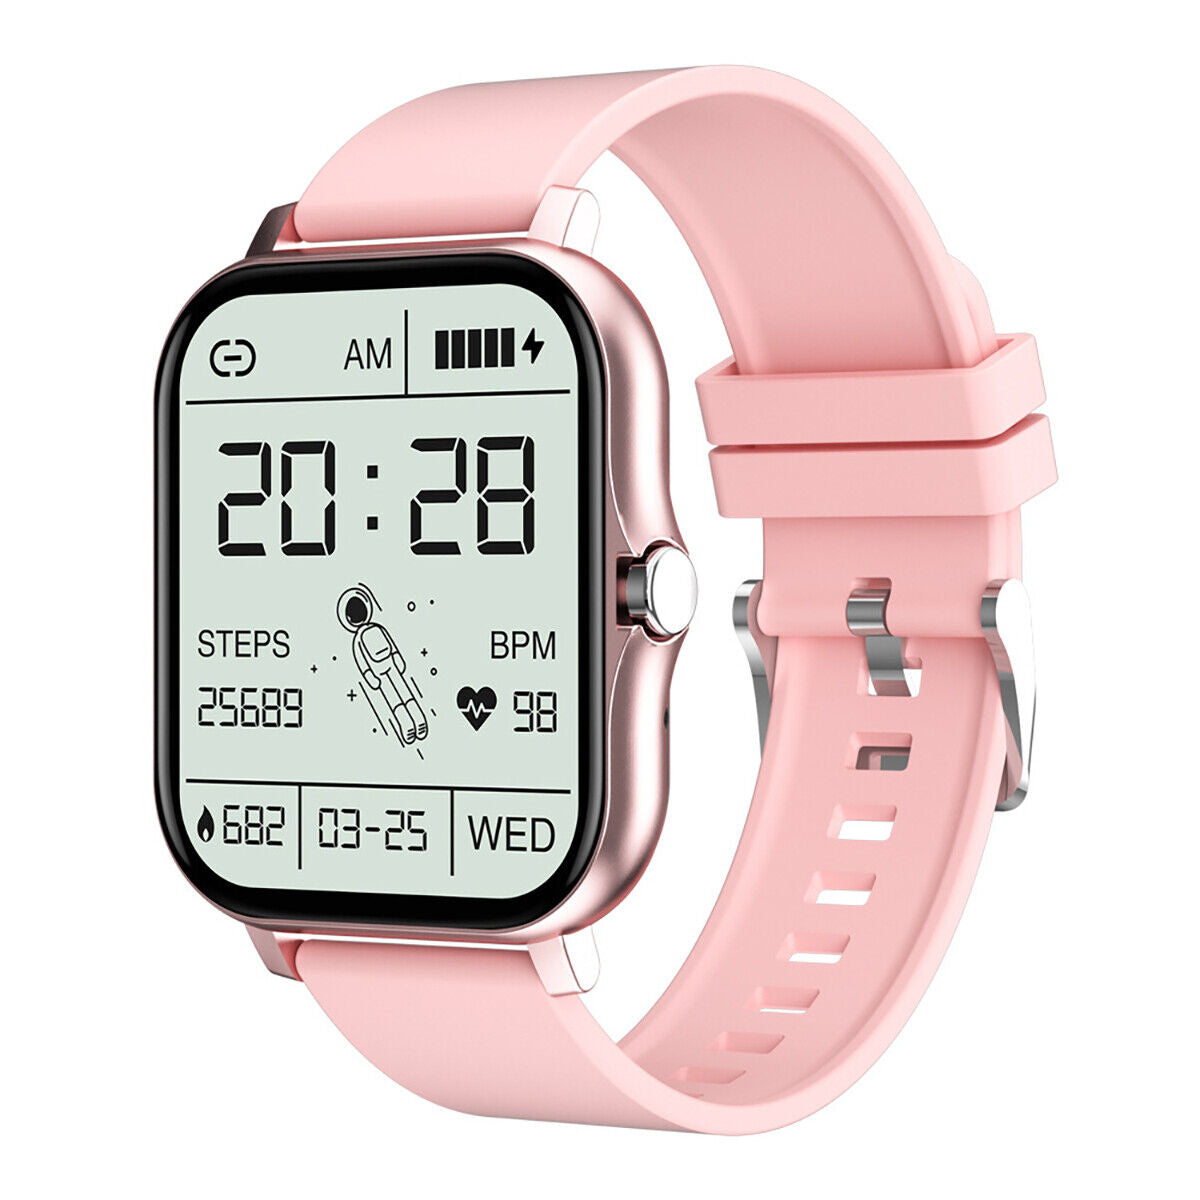 SmartWatch - Customizable, Fitness Tracker, Waterproof | iOS, Android